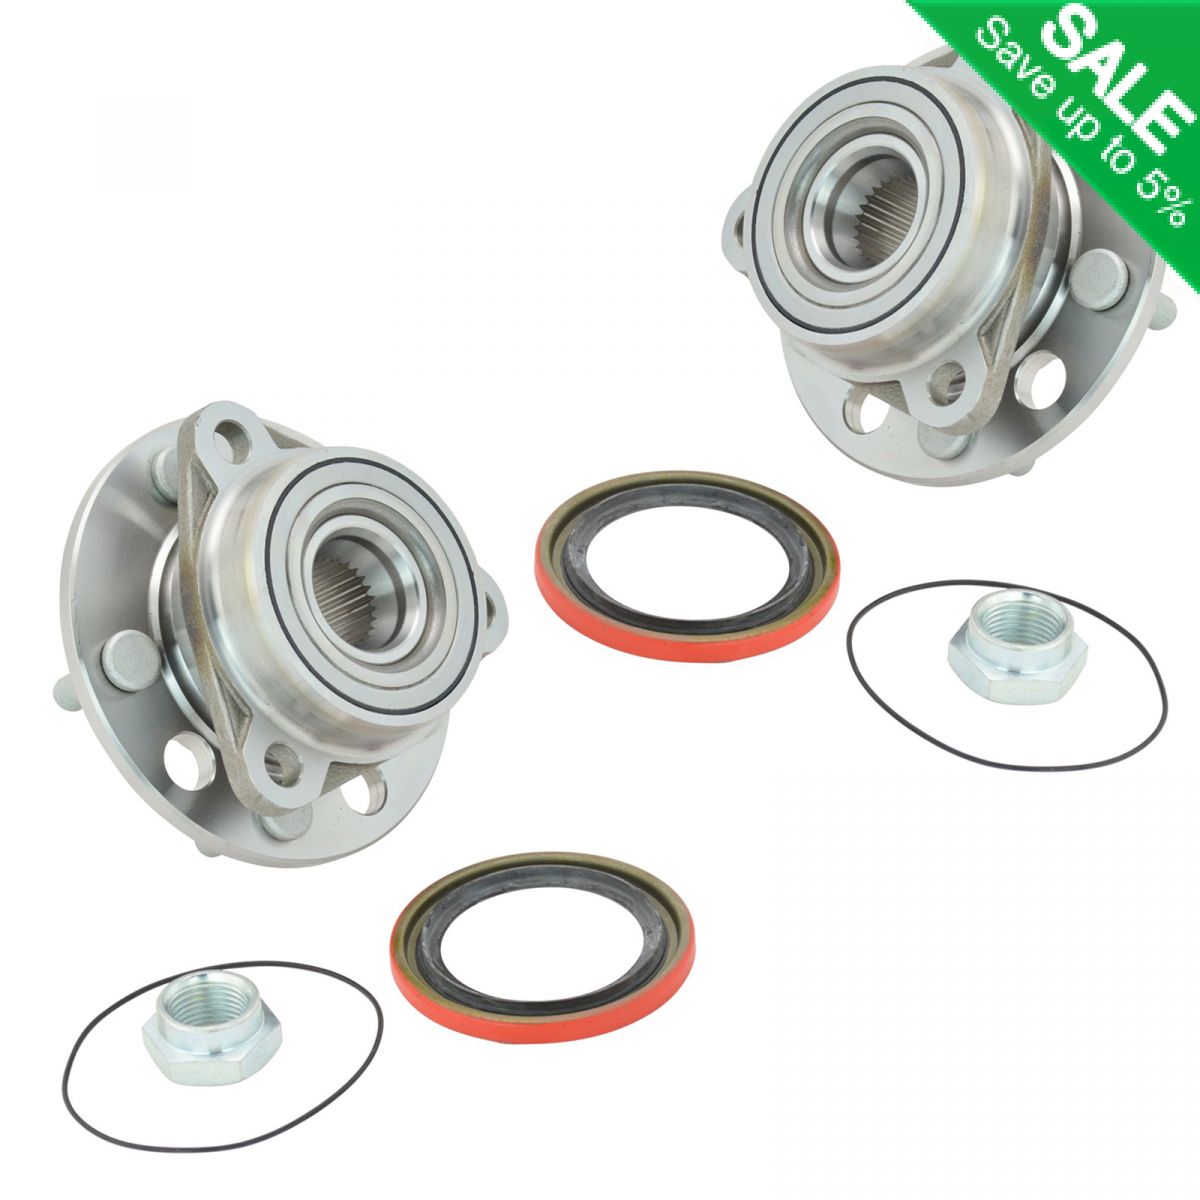 Front Left//Right Wheel Hub Bearing for Buick Century Chevy Cadillac Pontiac Olds